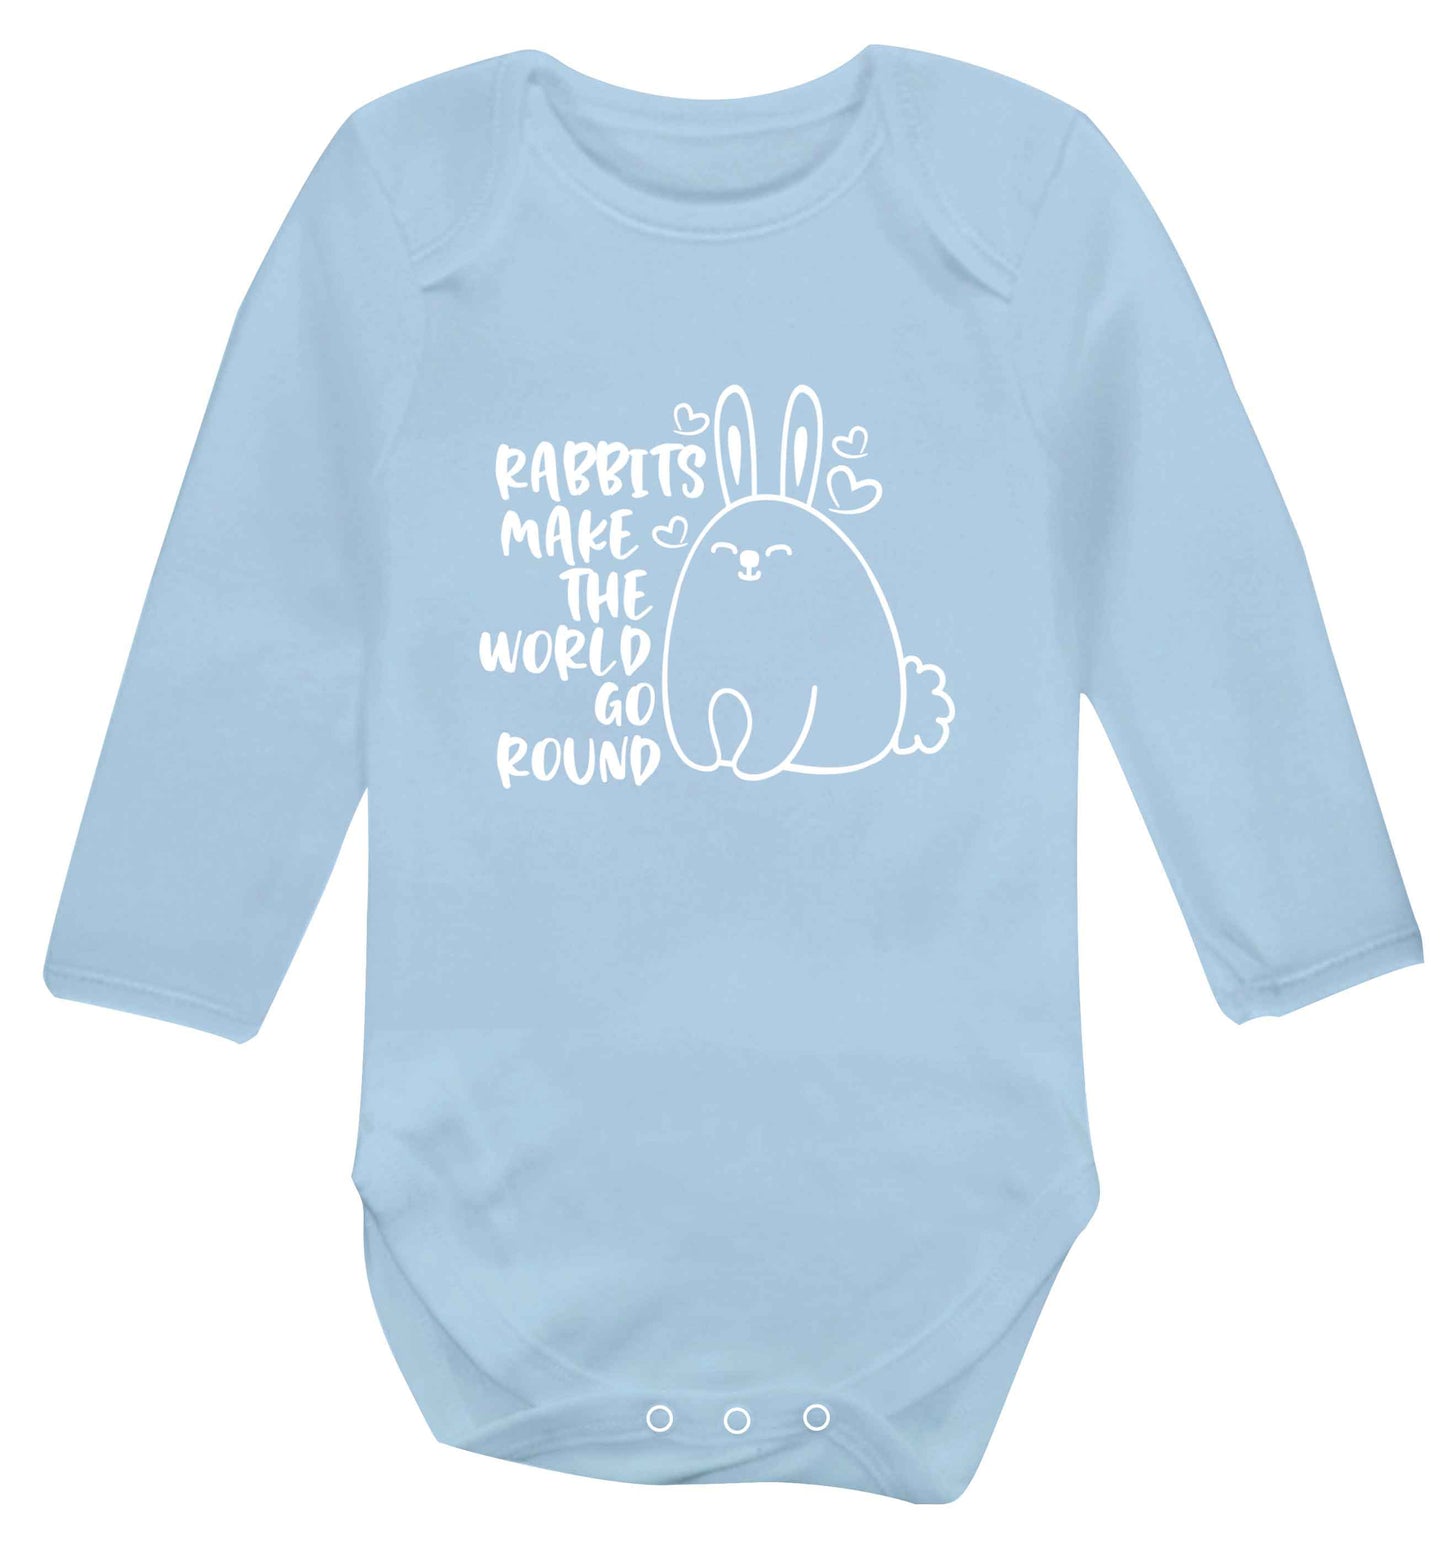 Rabbits make the world go round baby vest long sleeved pale blue 6-12 months